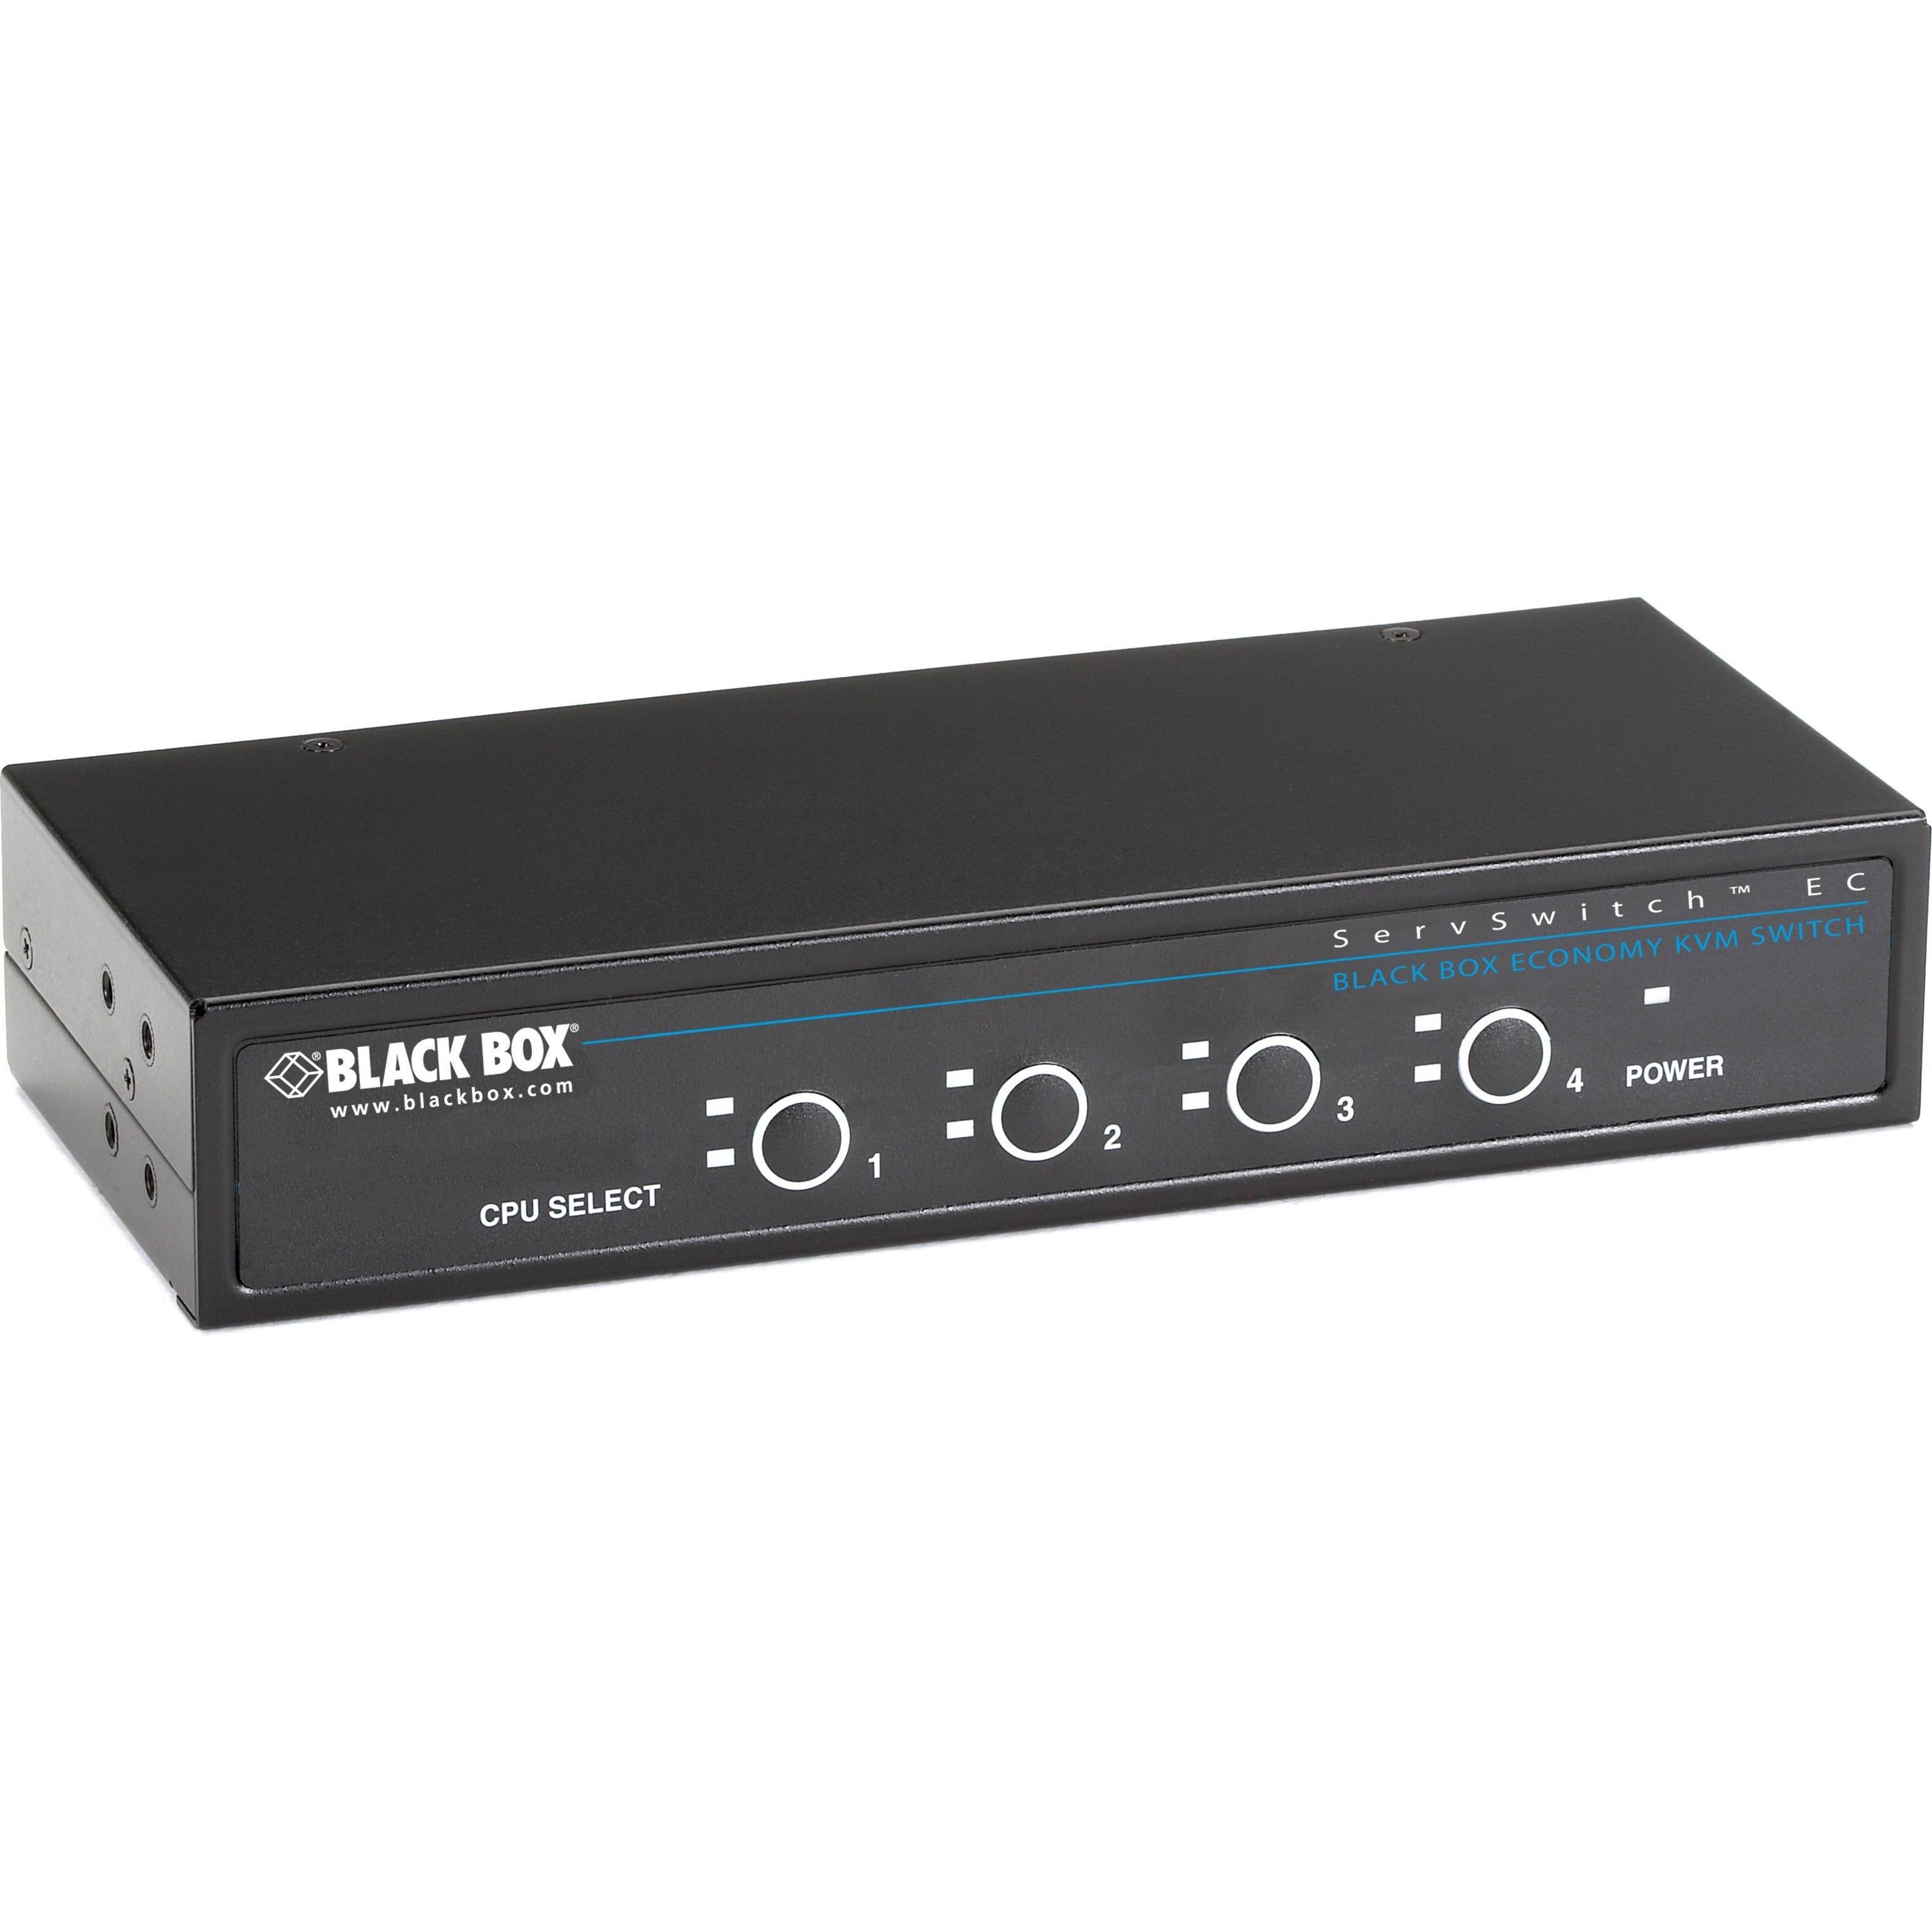 Black Box KV9004A ServSwitch EC KVM Switch, 4 Computers Supported, PS/2 Ports, 1920 x 1440 Resolution, 1 Year Warranty